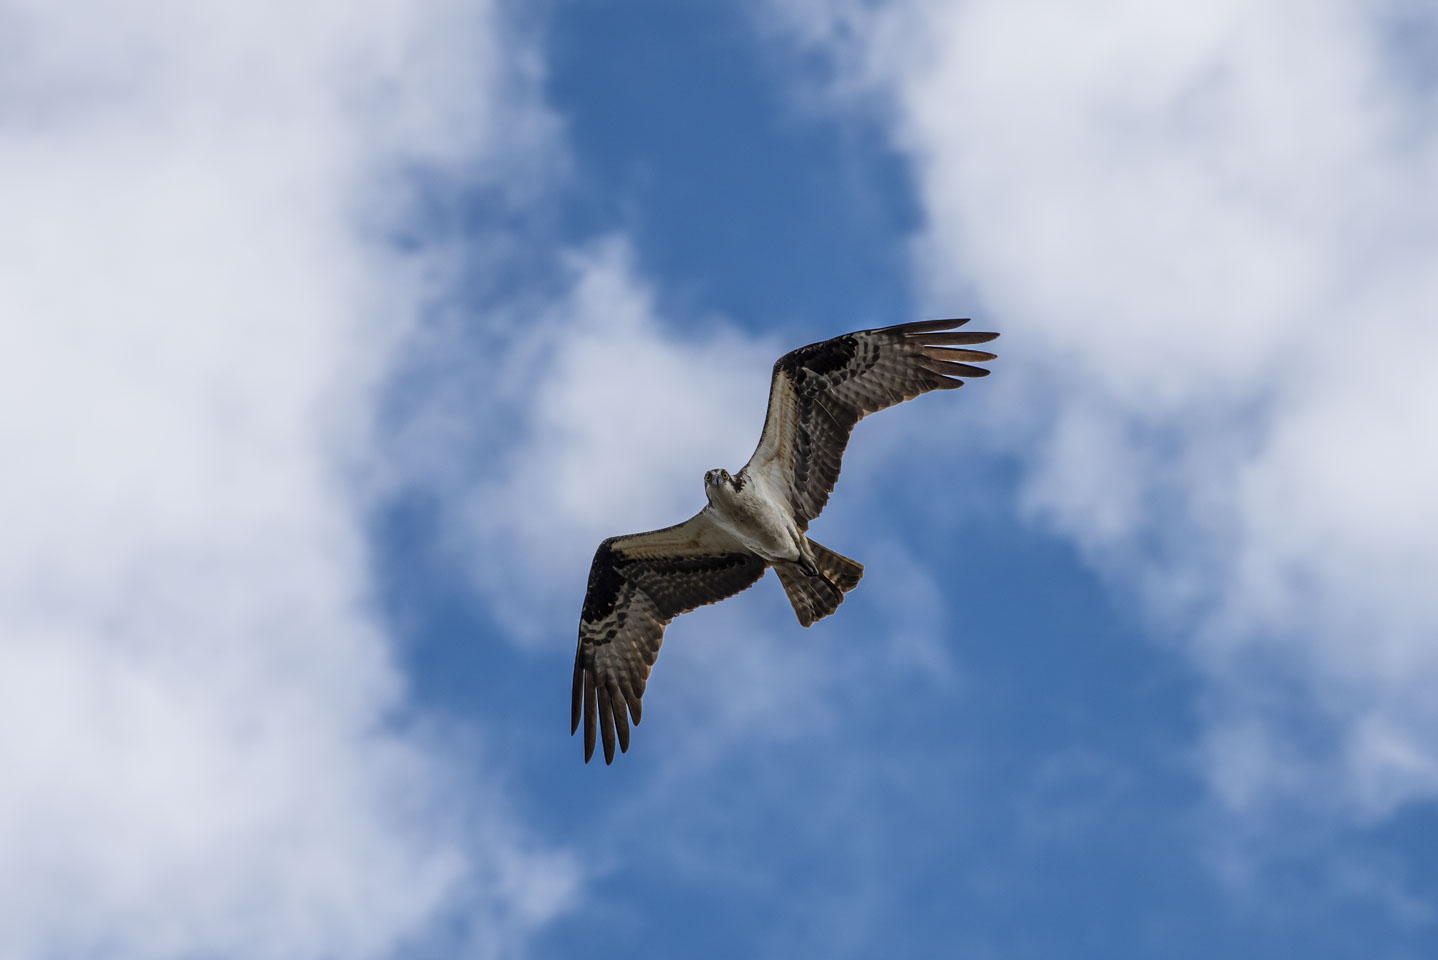 Osprey in the air, with clouds behind it, looking down at the viewer